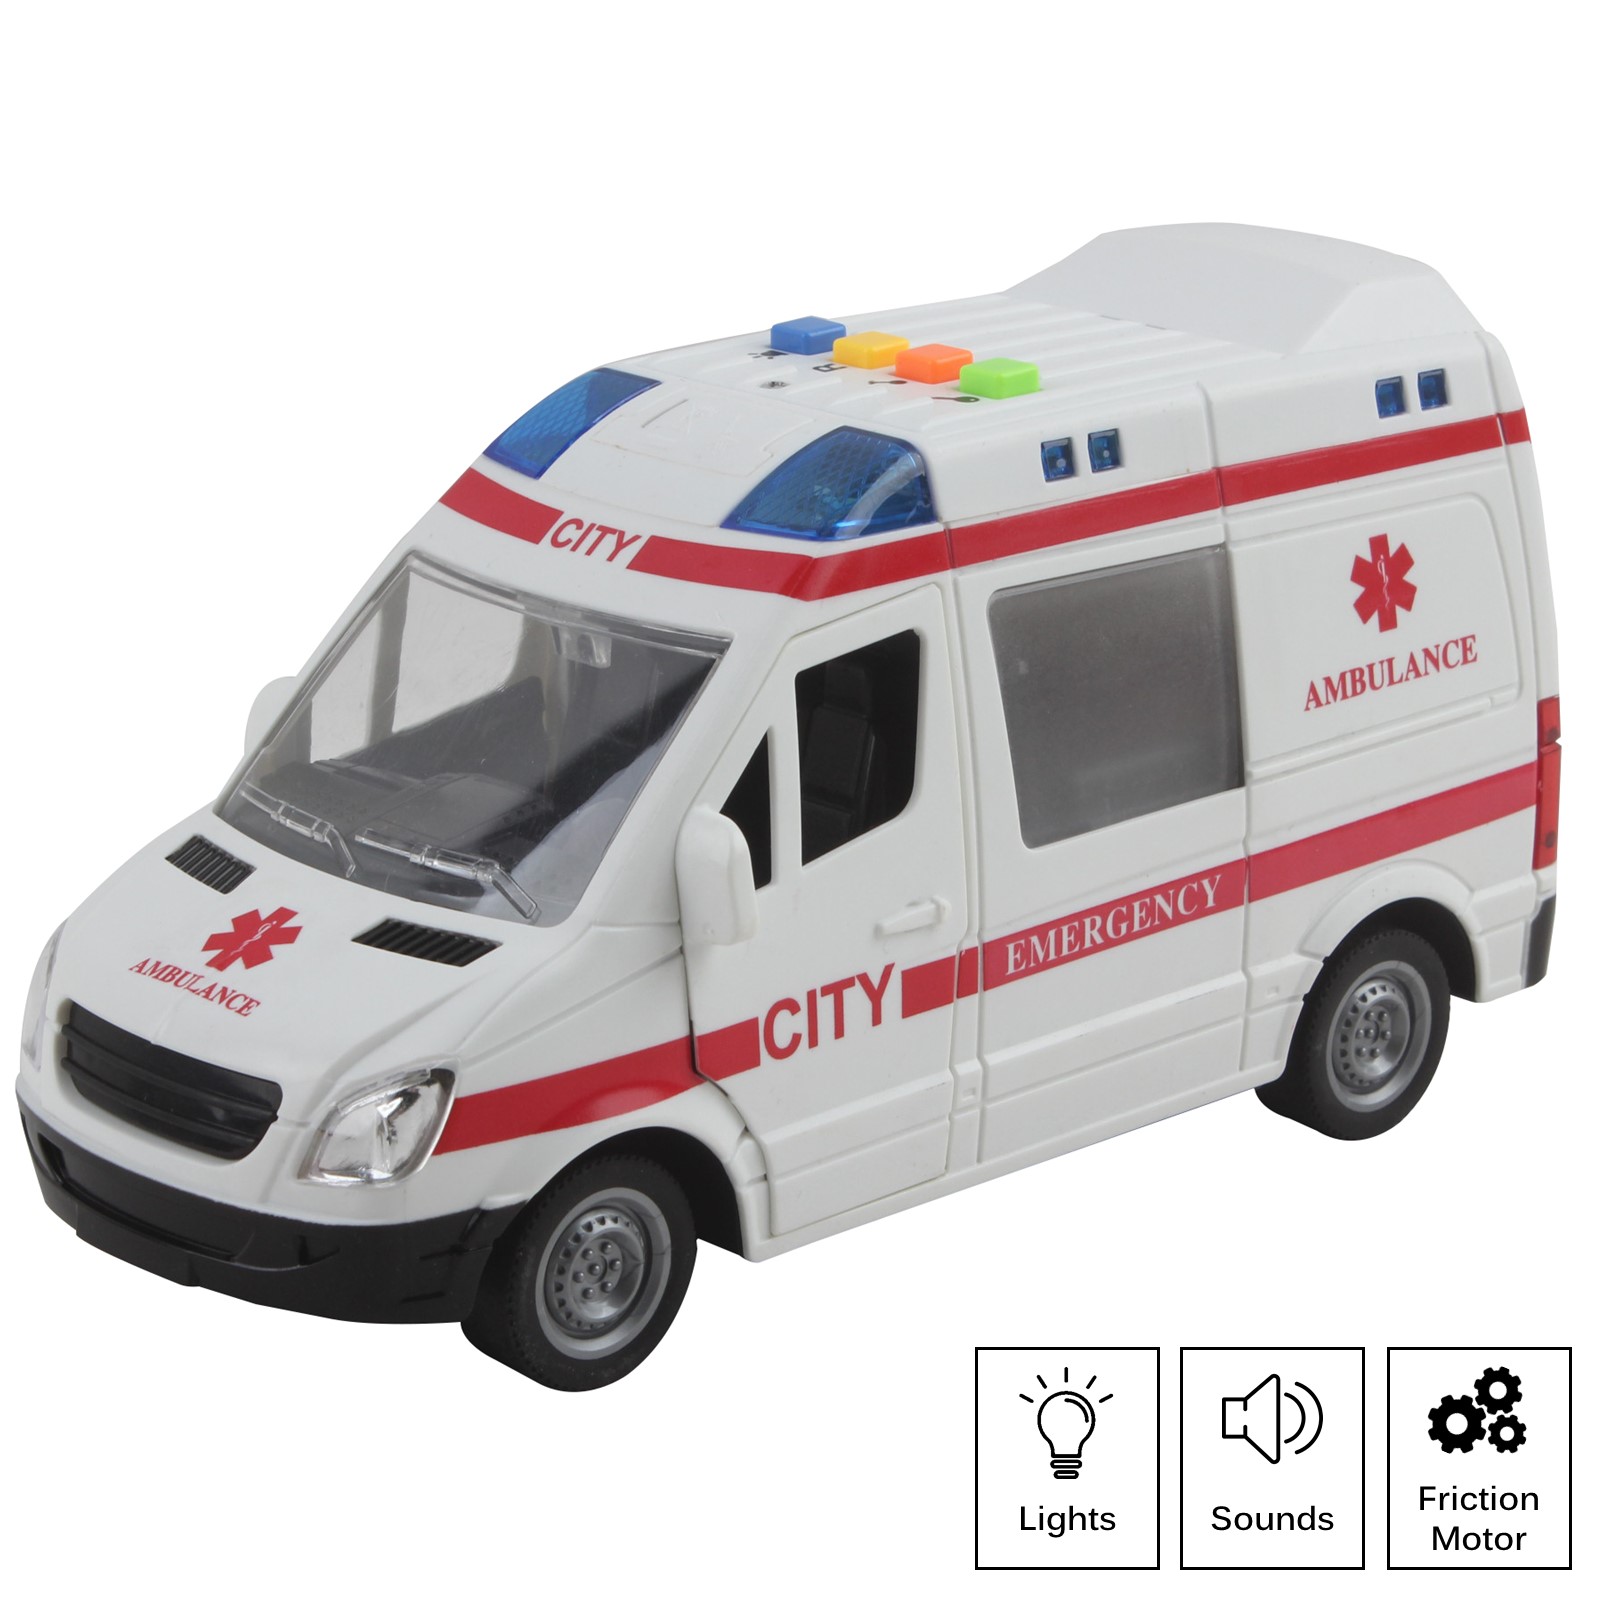 Rescue Ambulance Friction Powered 116 Scale With Lights And Sounds Kids Medical Transport Emergency Vehicle Push And Go Durable Toy Car Pretend Play Van Great Gift For Children Boys Girls